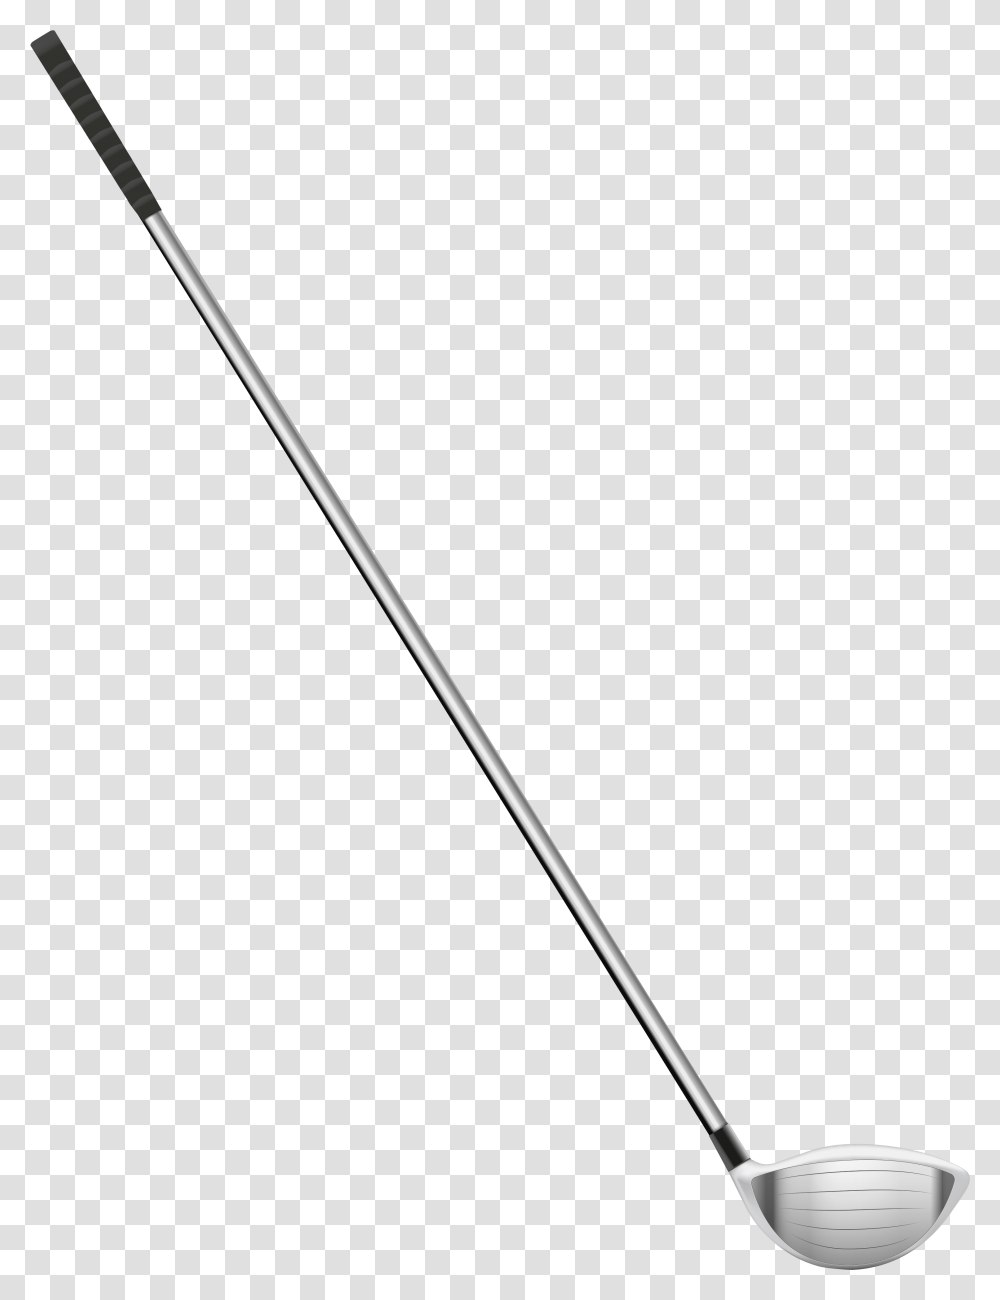 Golf Club Clipart Golf Club Clipart, Weapon, Weaponry, Spear Transparent Png